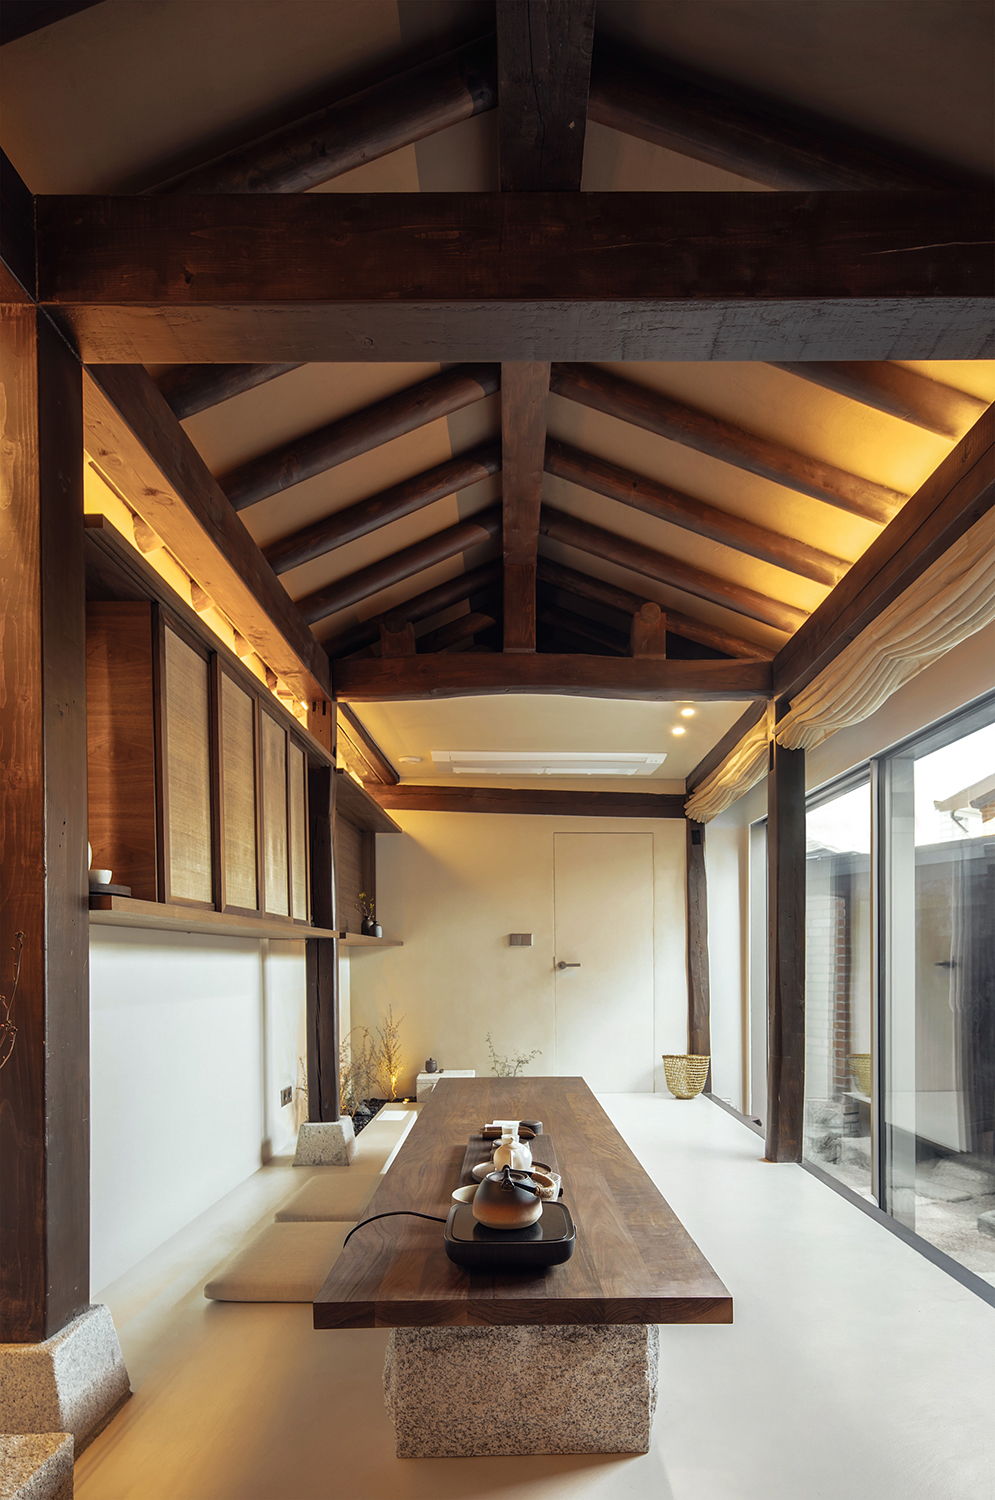 Korean Traditional House Idealwork Concrete Finishes For